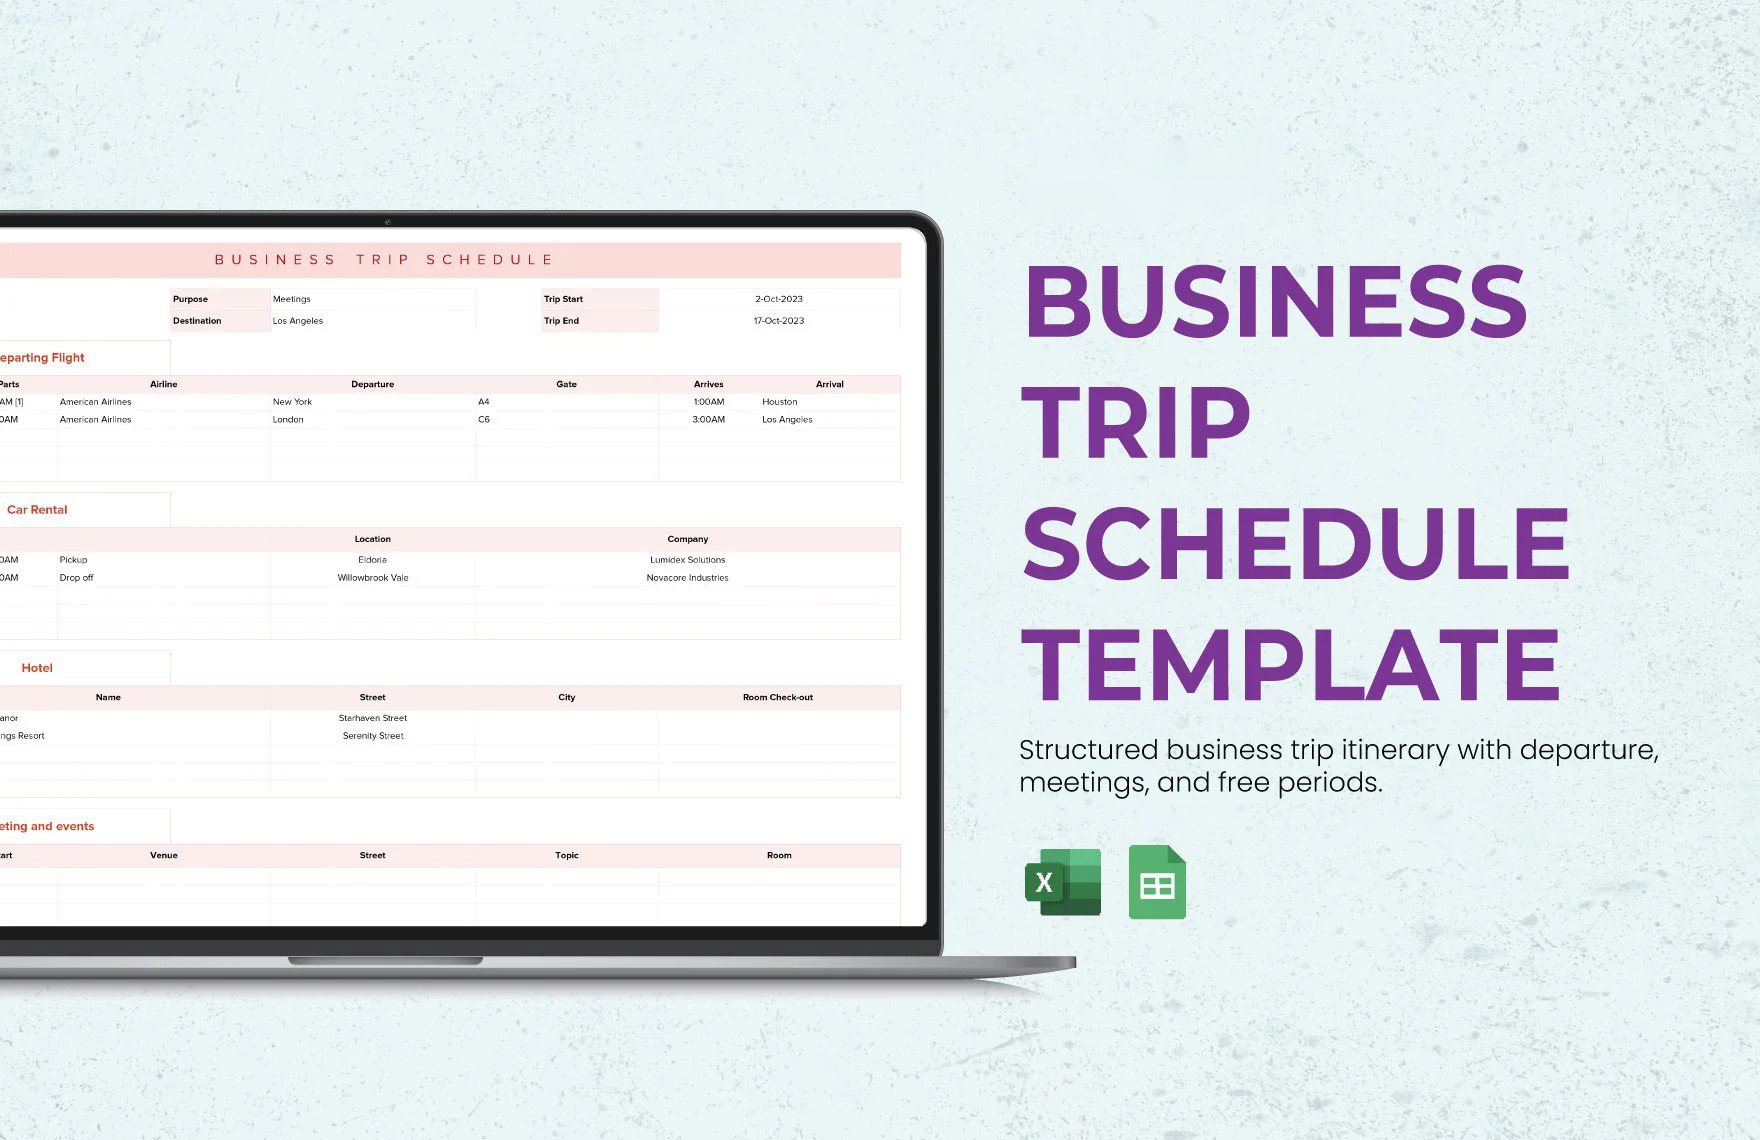 Business Trip Schedule Template in Excel, Google Sheets